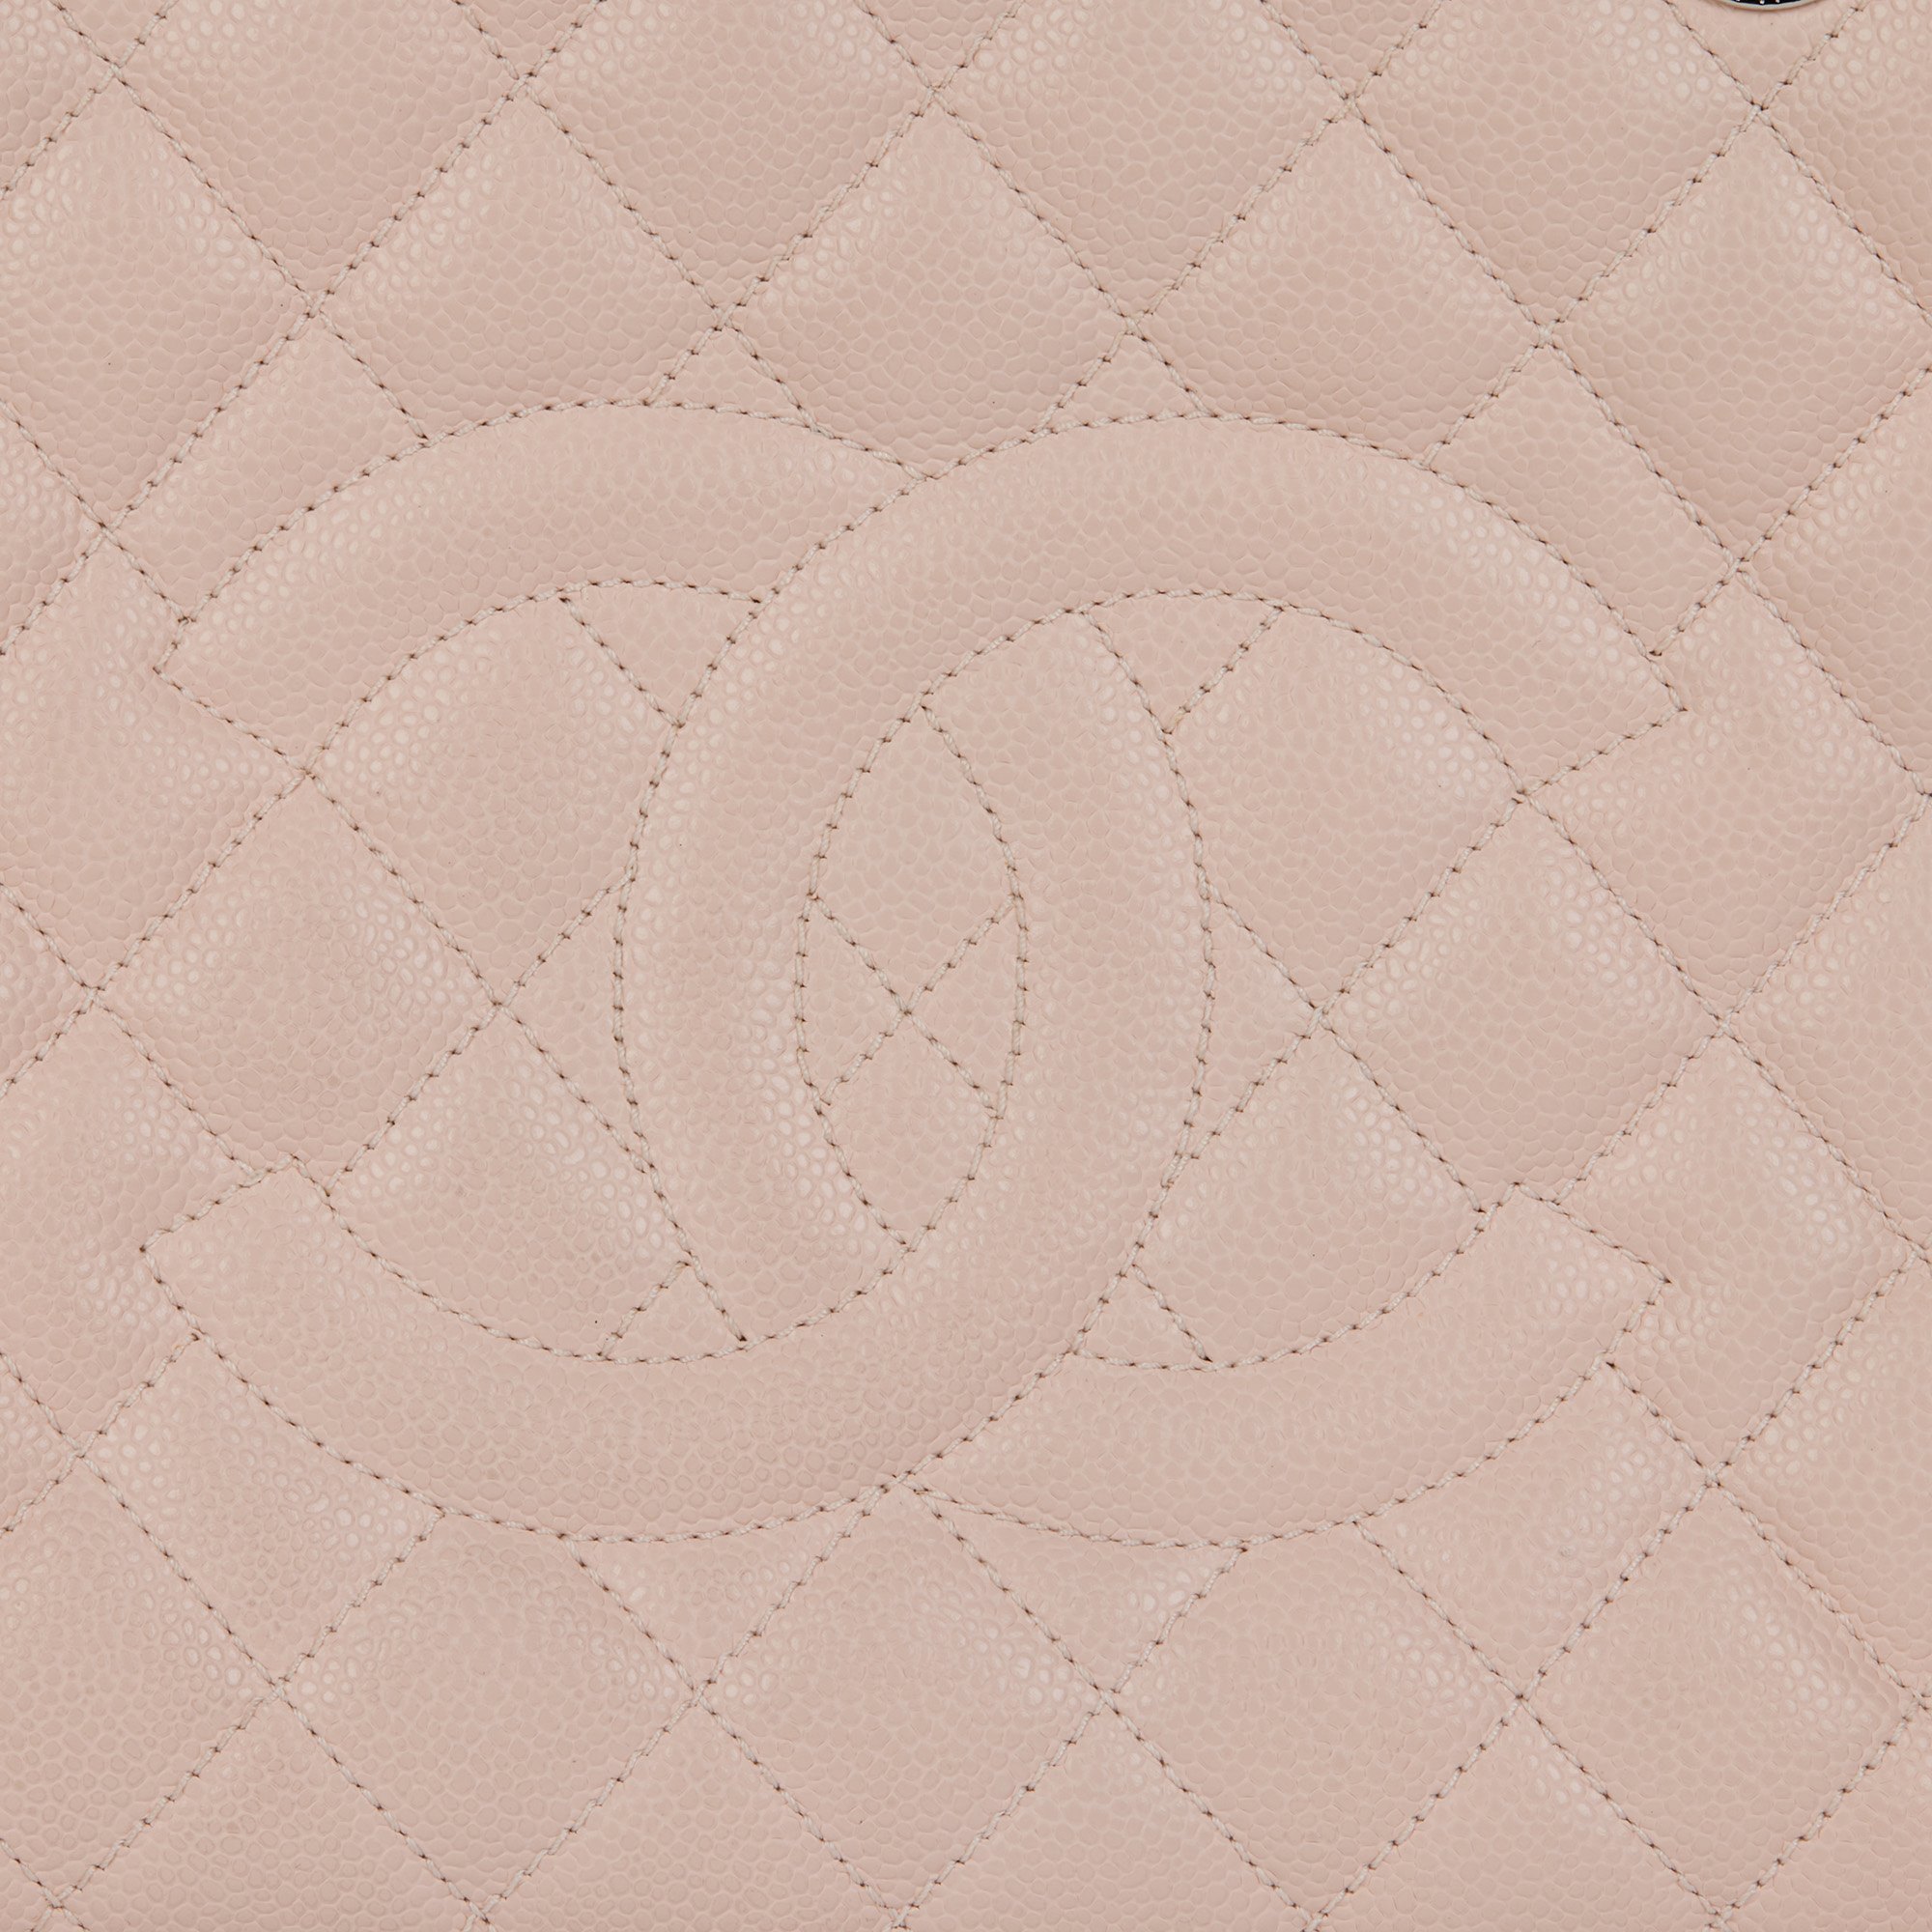 Chanel Pale Pink Quilted Caviar Leather Grand Shopping Tote GST